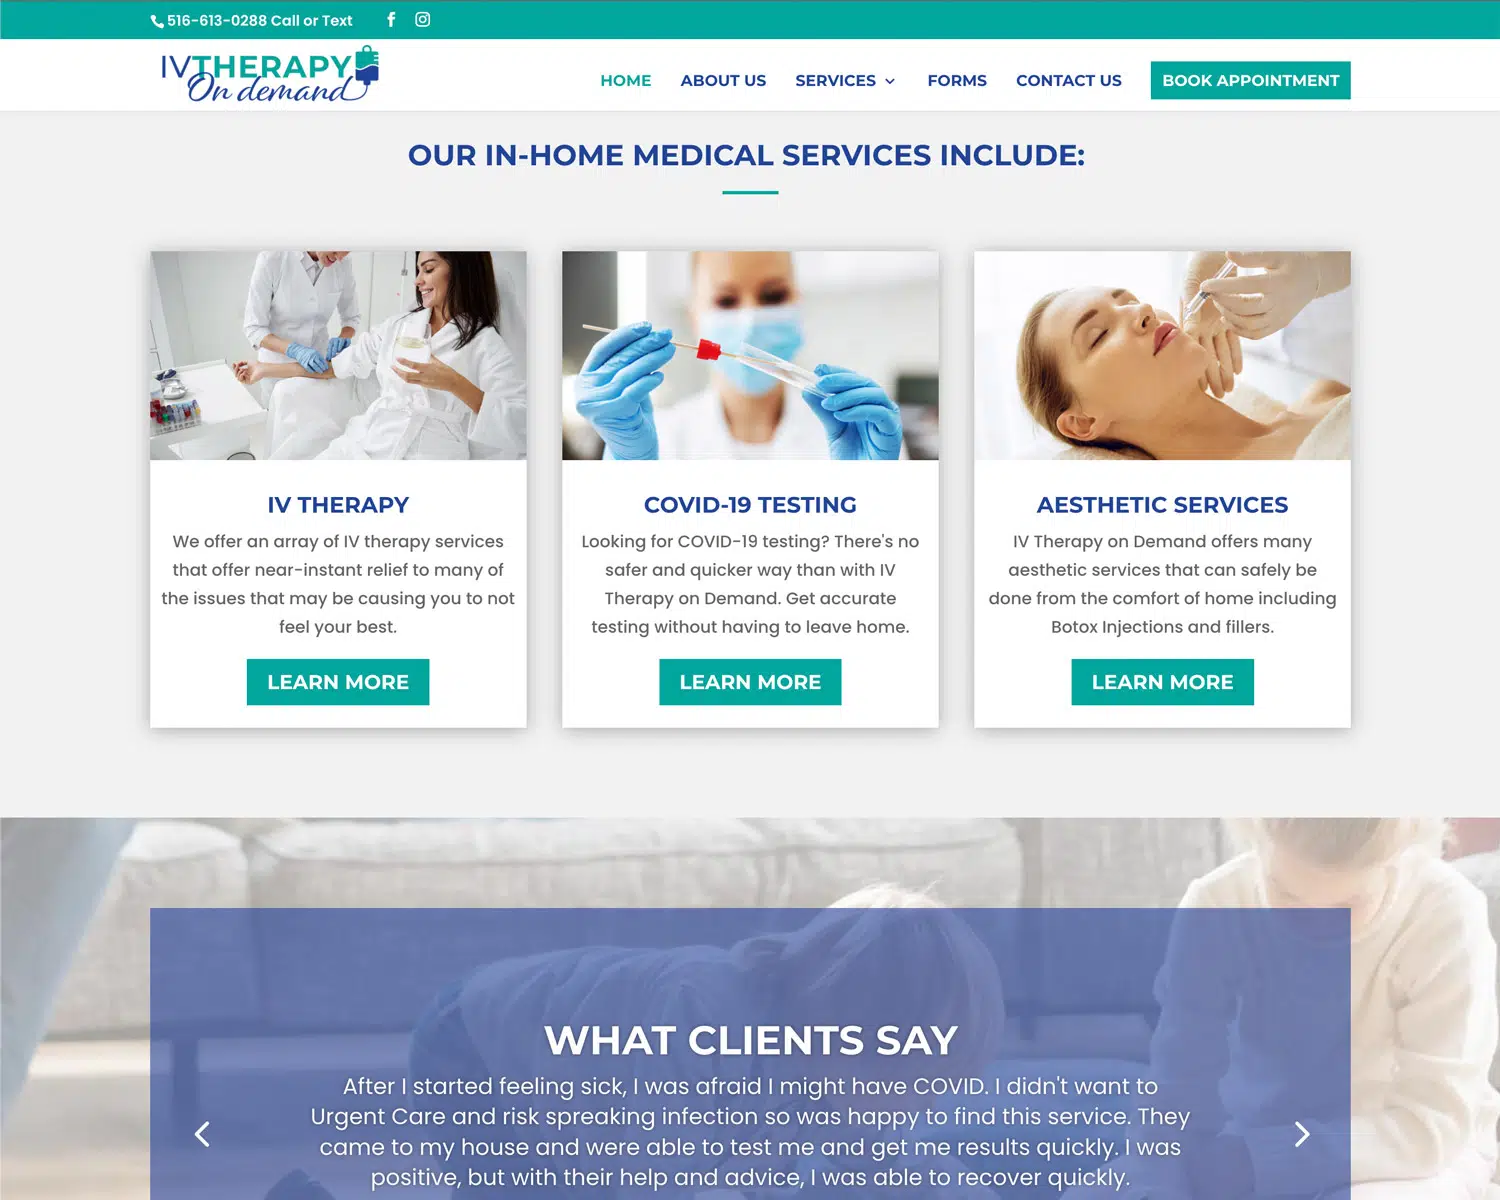 website design IV Therapy On Demand